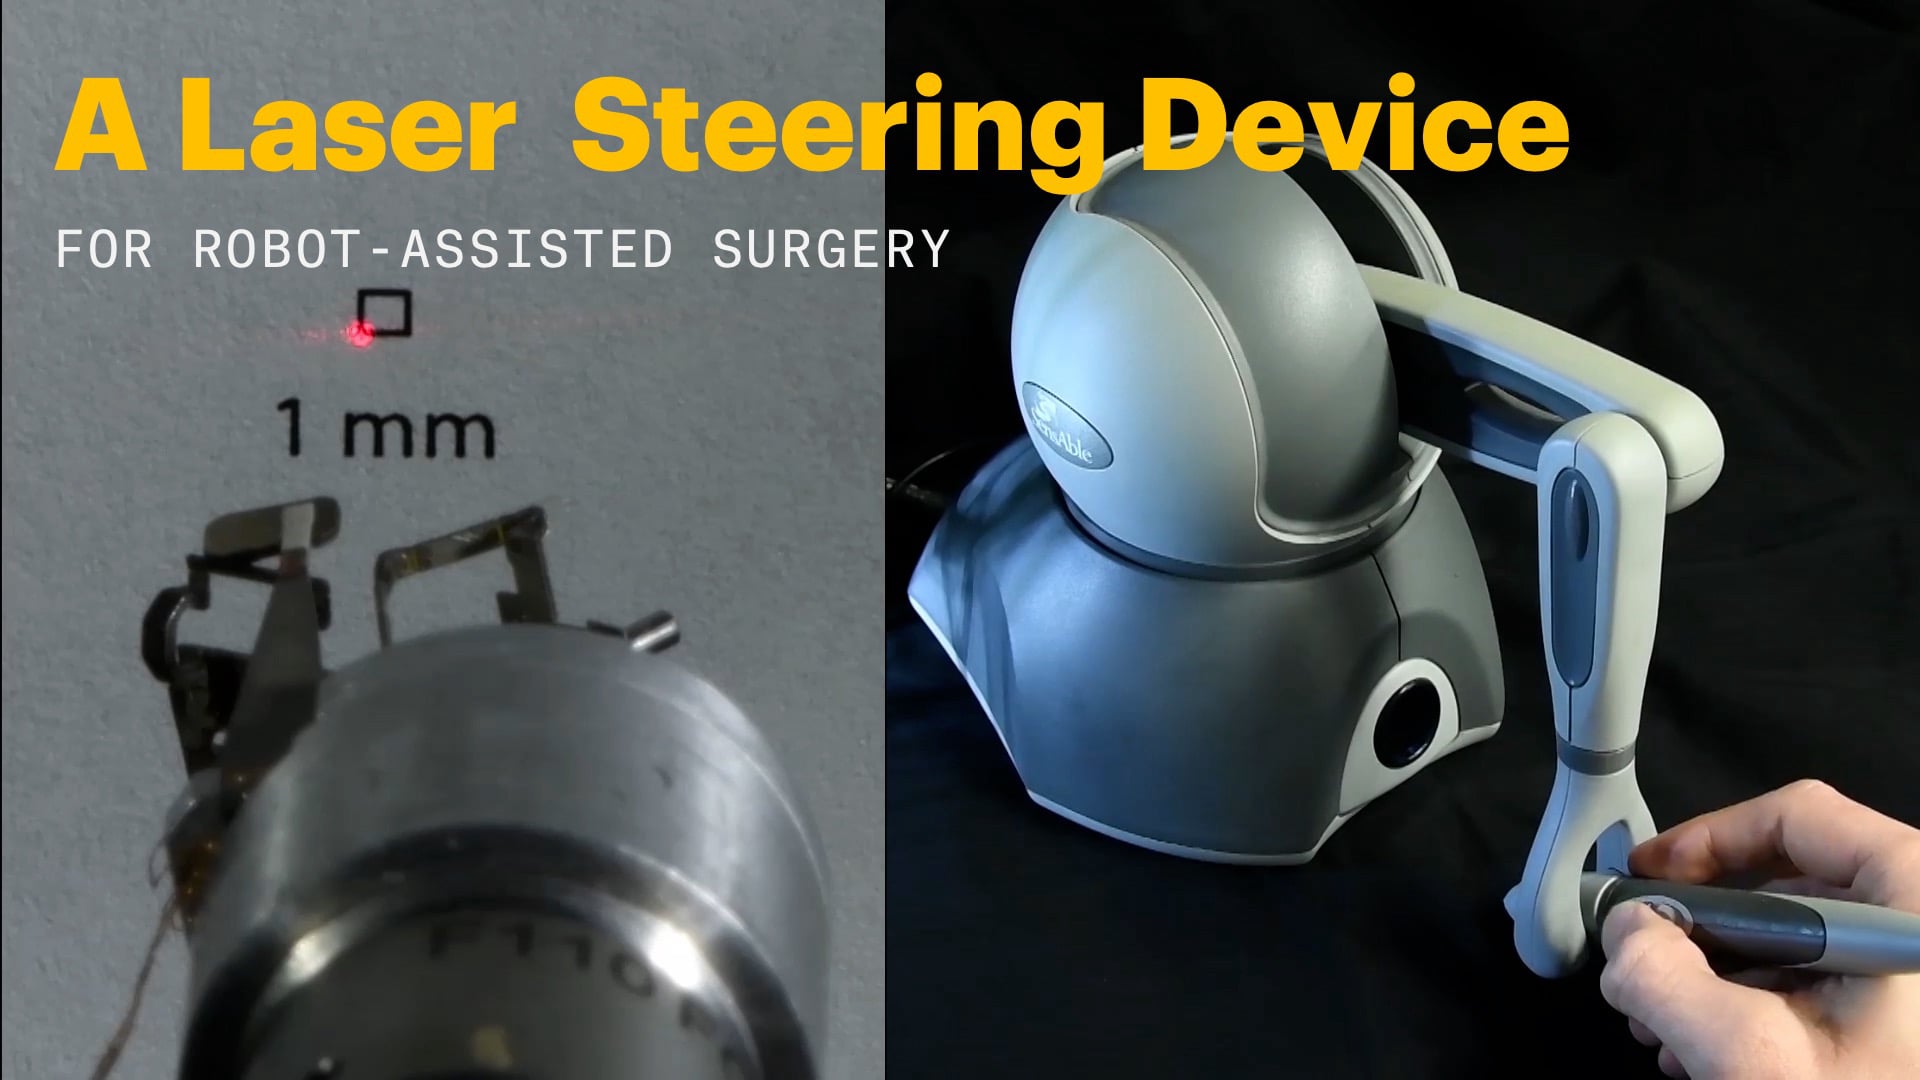 A Laser Steering Device for Robot-assisted Surgery